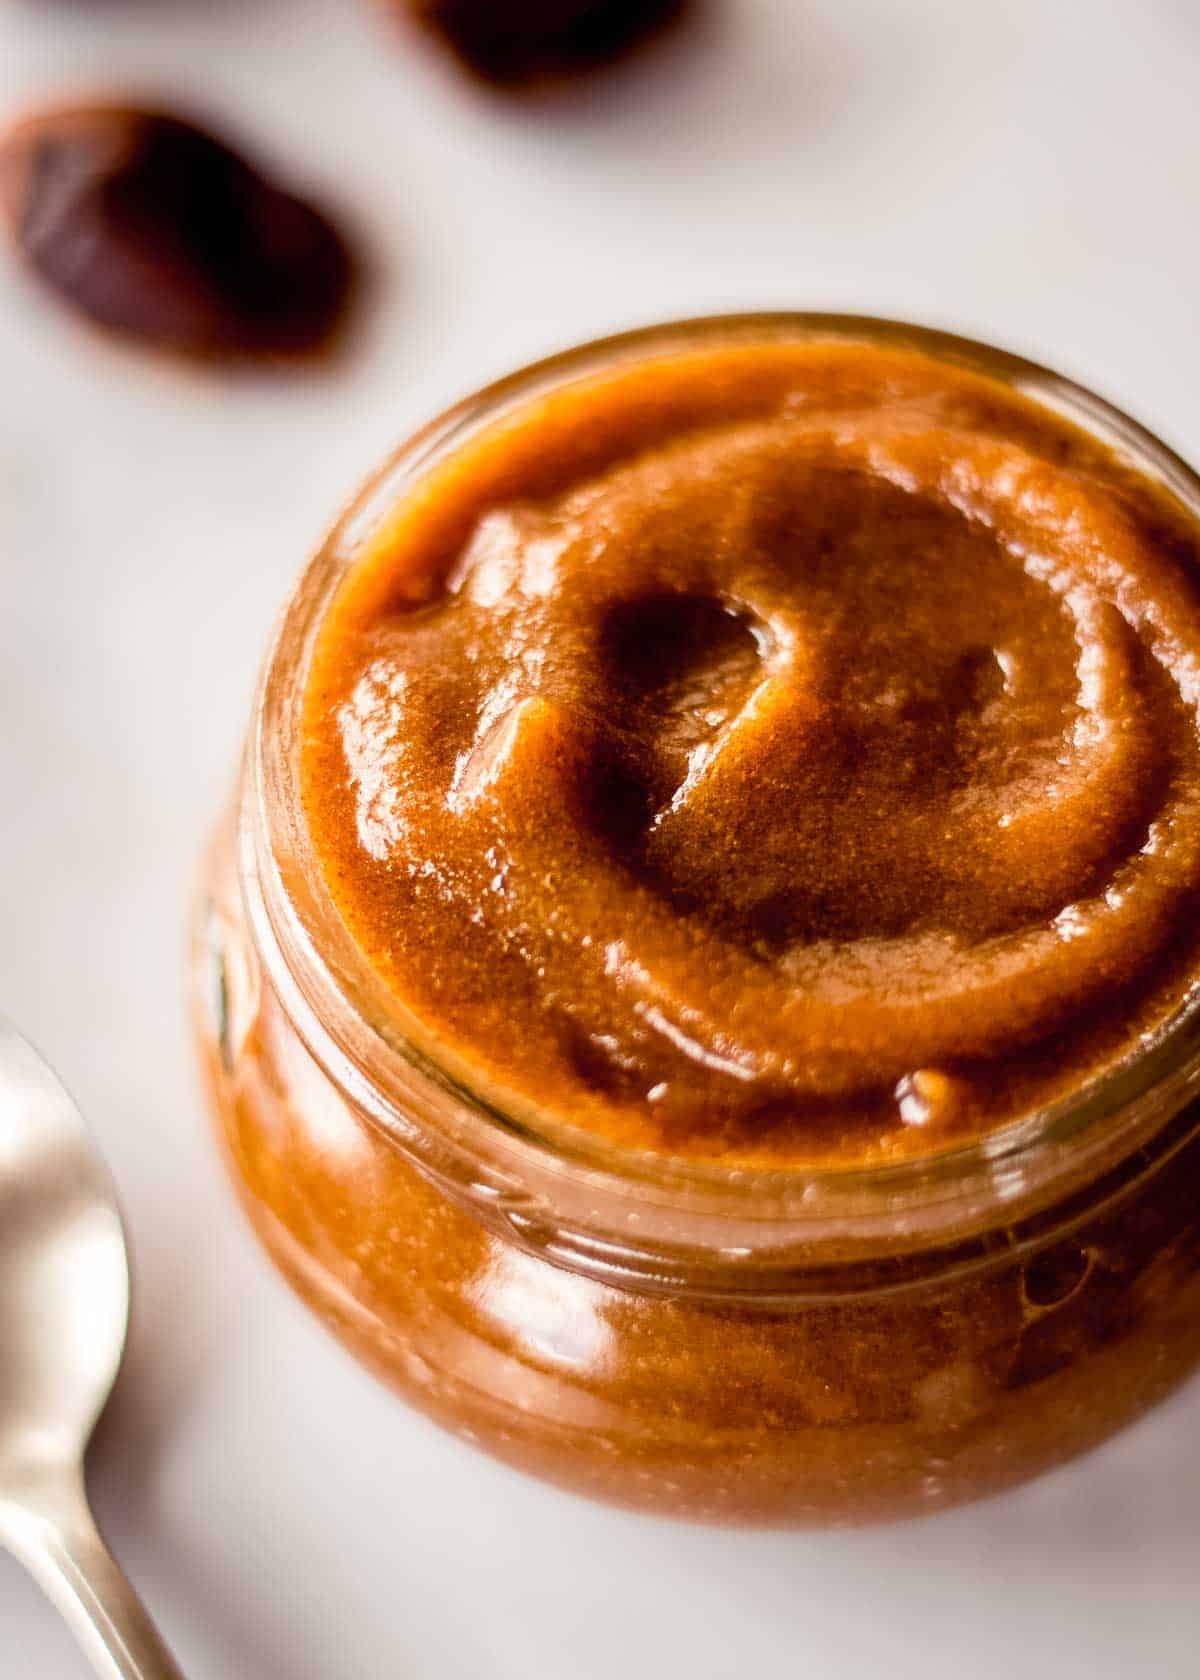 Glass jar of date paste, forming a swirl on top. There are dates in the background and a spoon nearby.